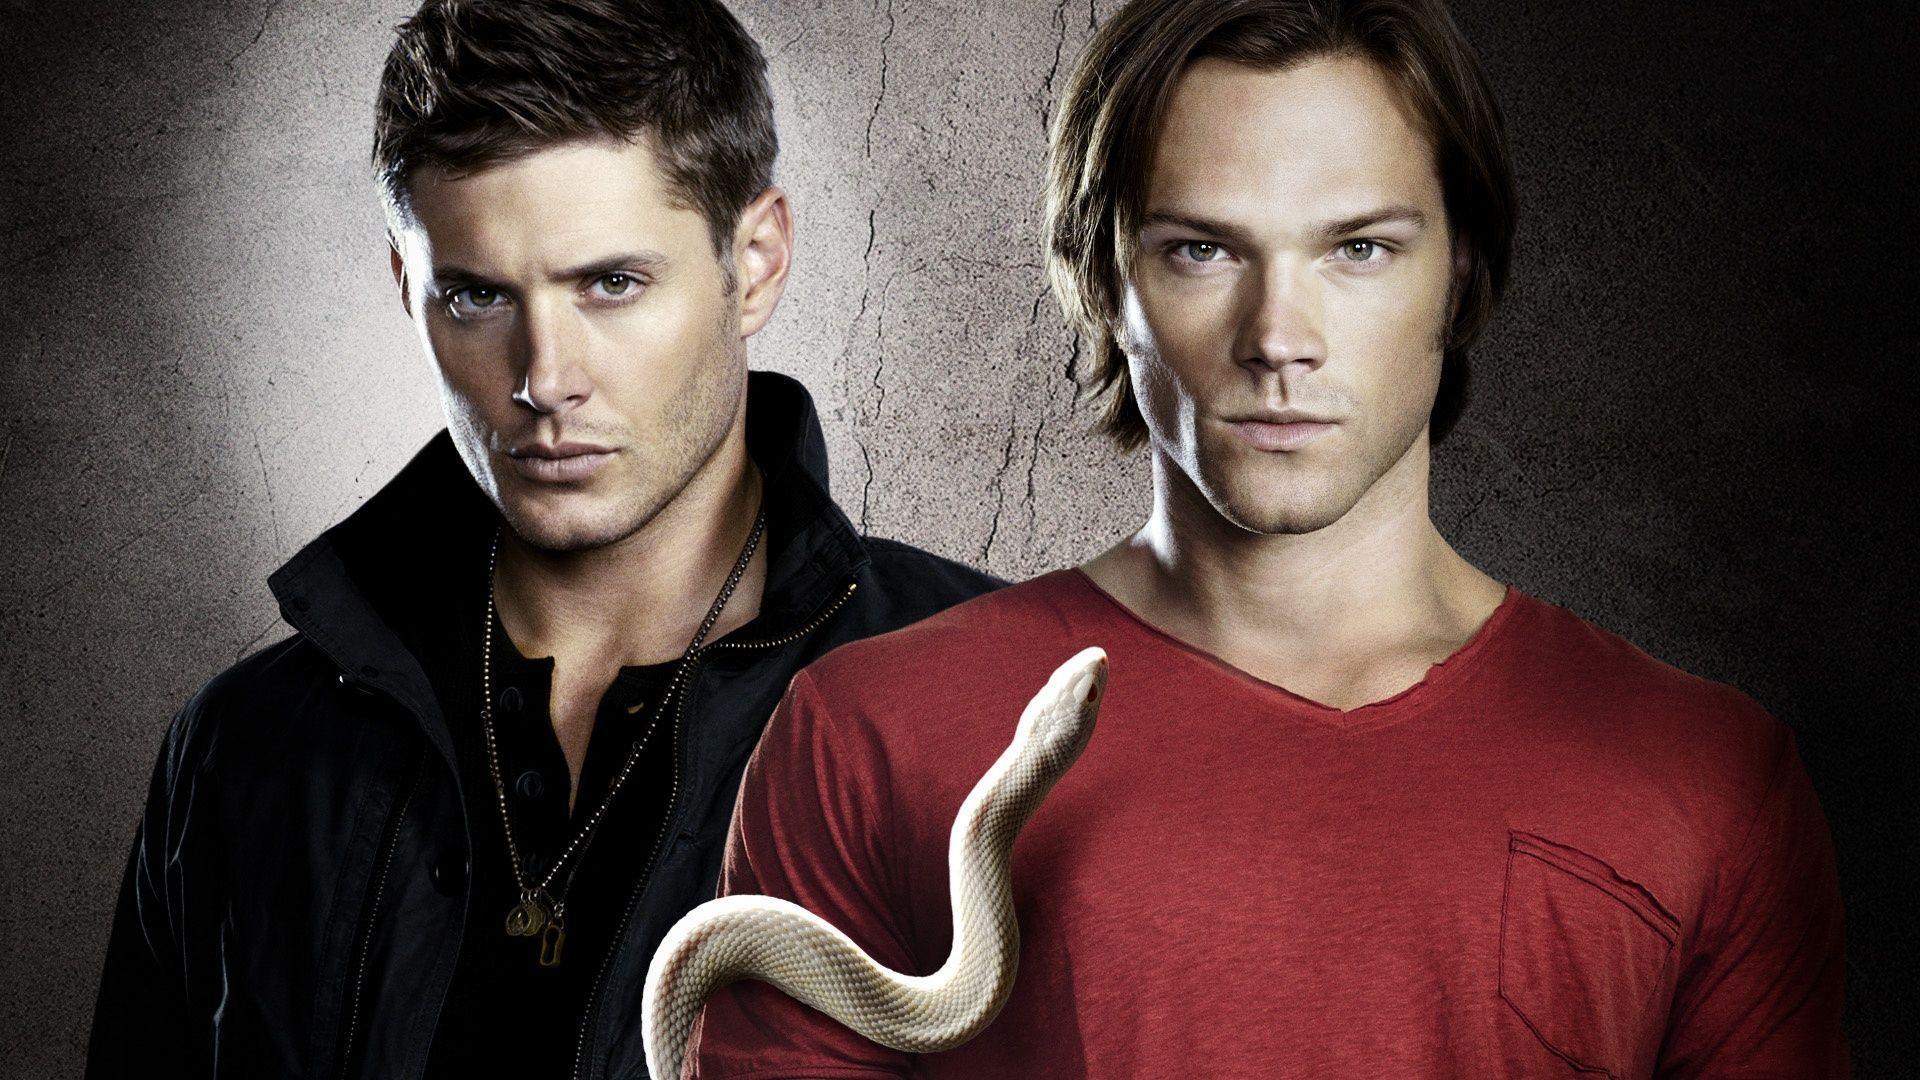 Supernatural: Jared Padalecki & Jensen Ackles On How They Want The